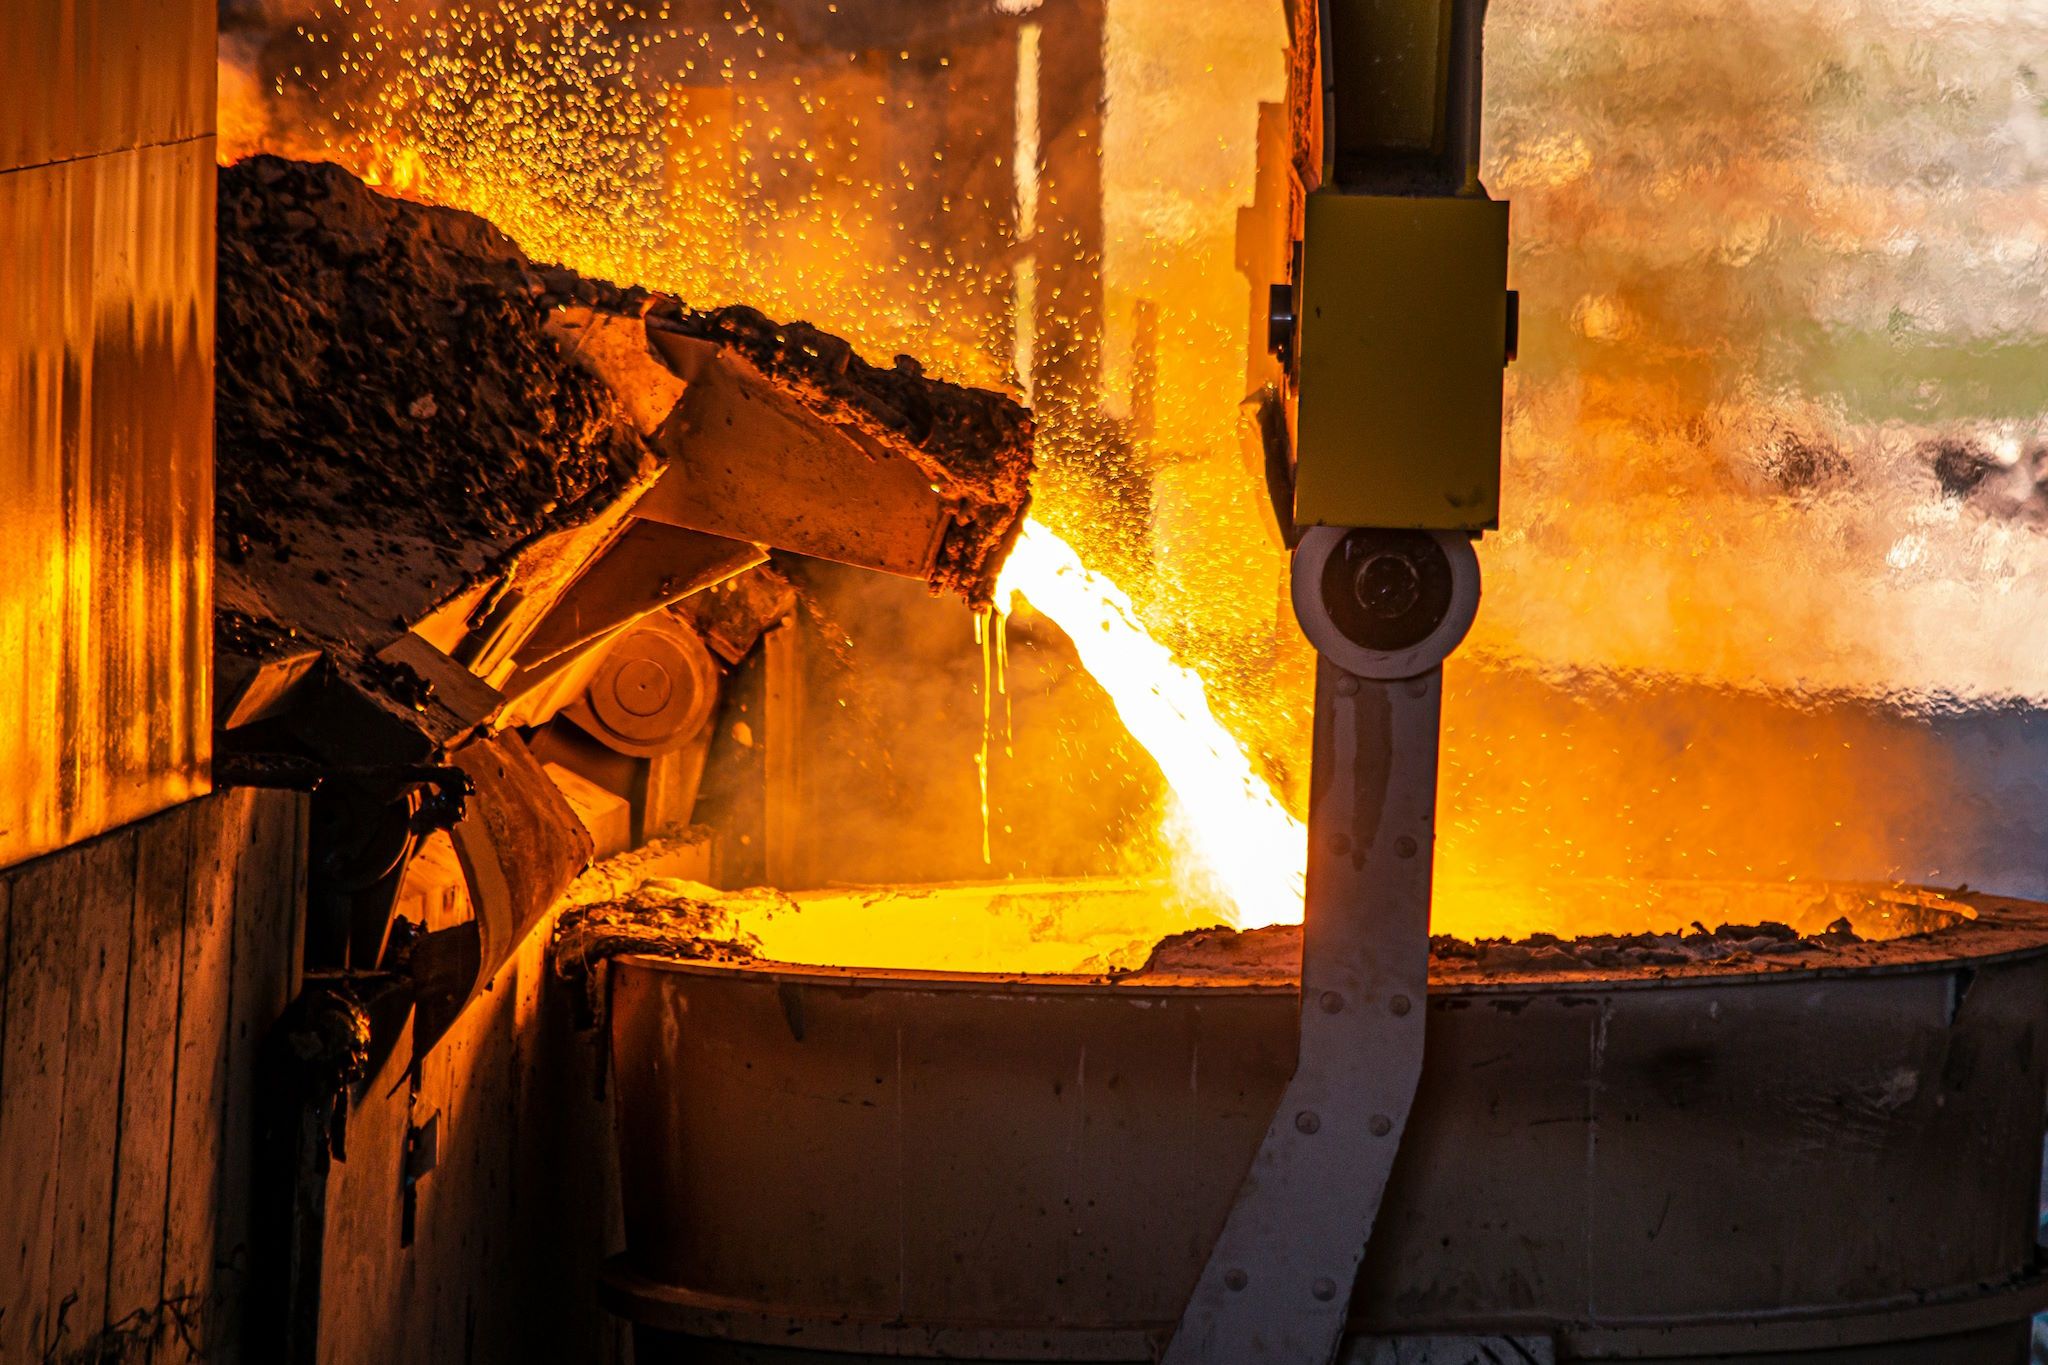 A picture of molten metal exiting the spout of a foundry into a vat